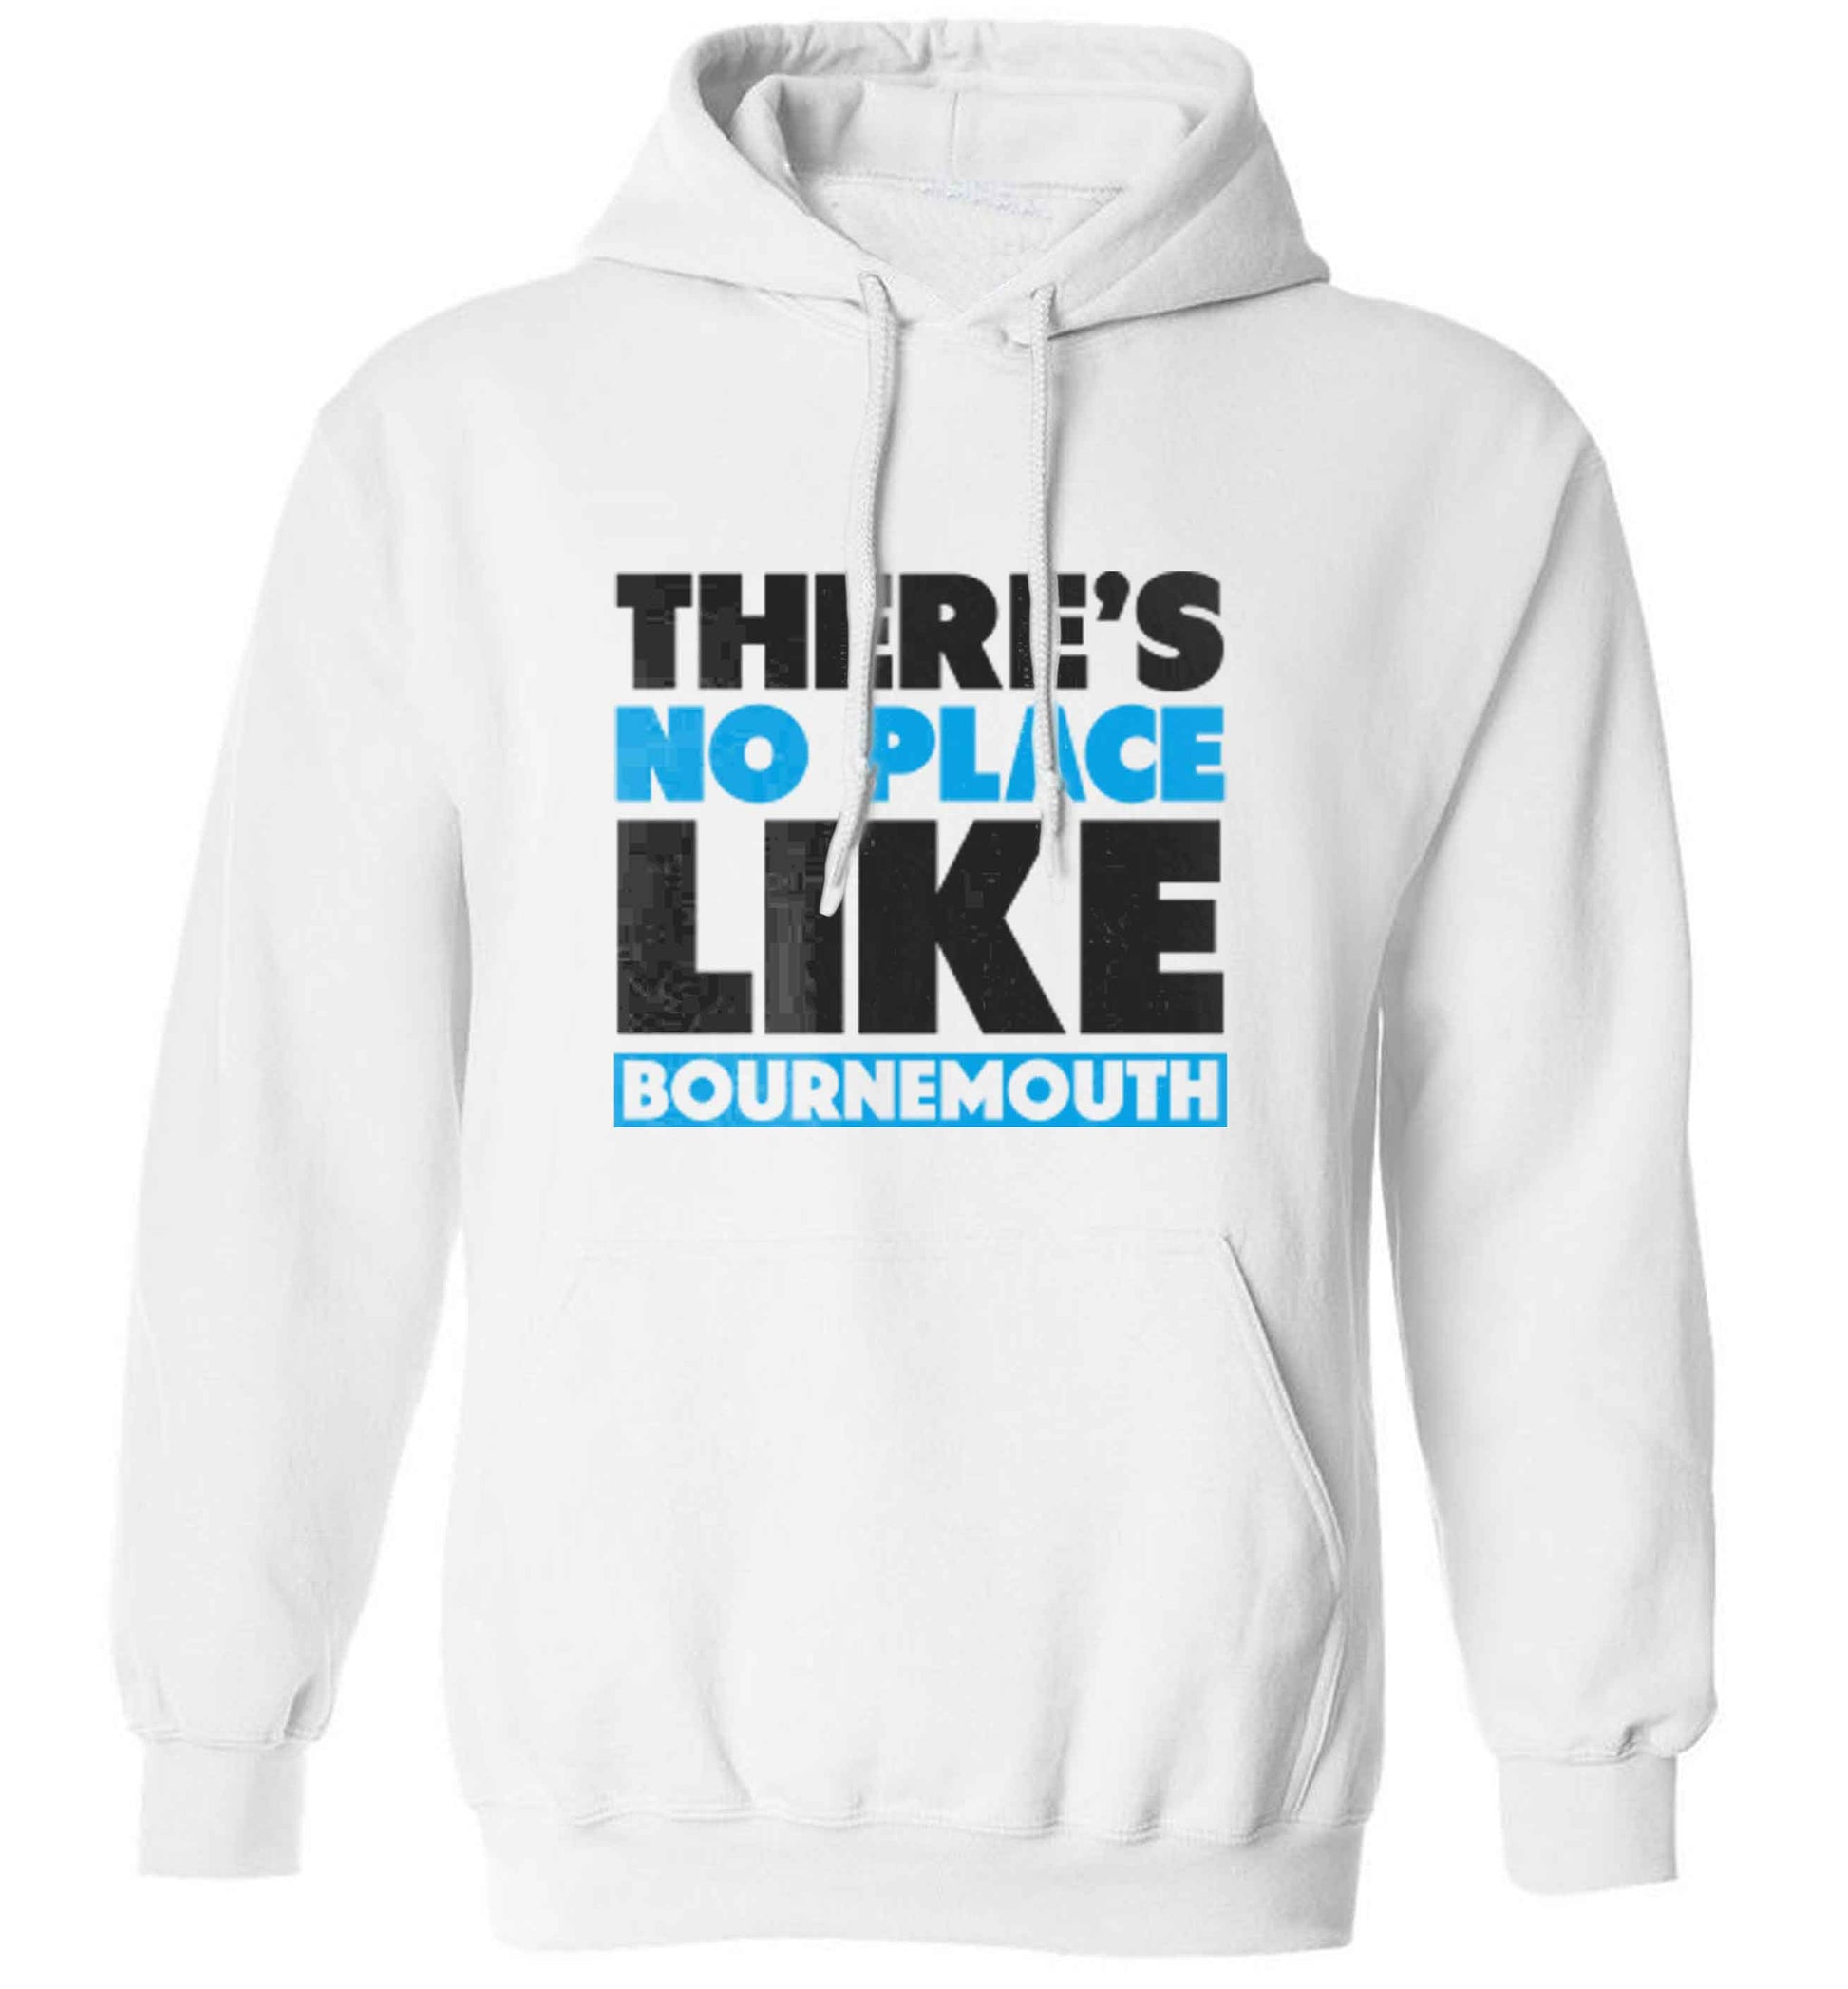 There's no place like Bournemouth adults unisex white hoodie 2XL